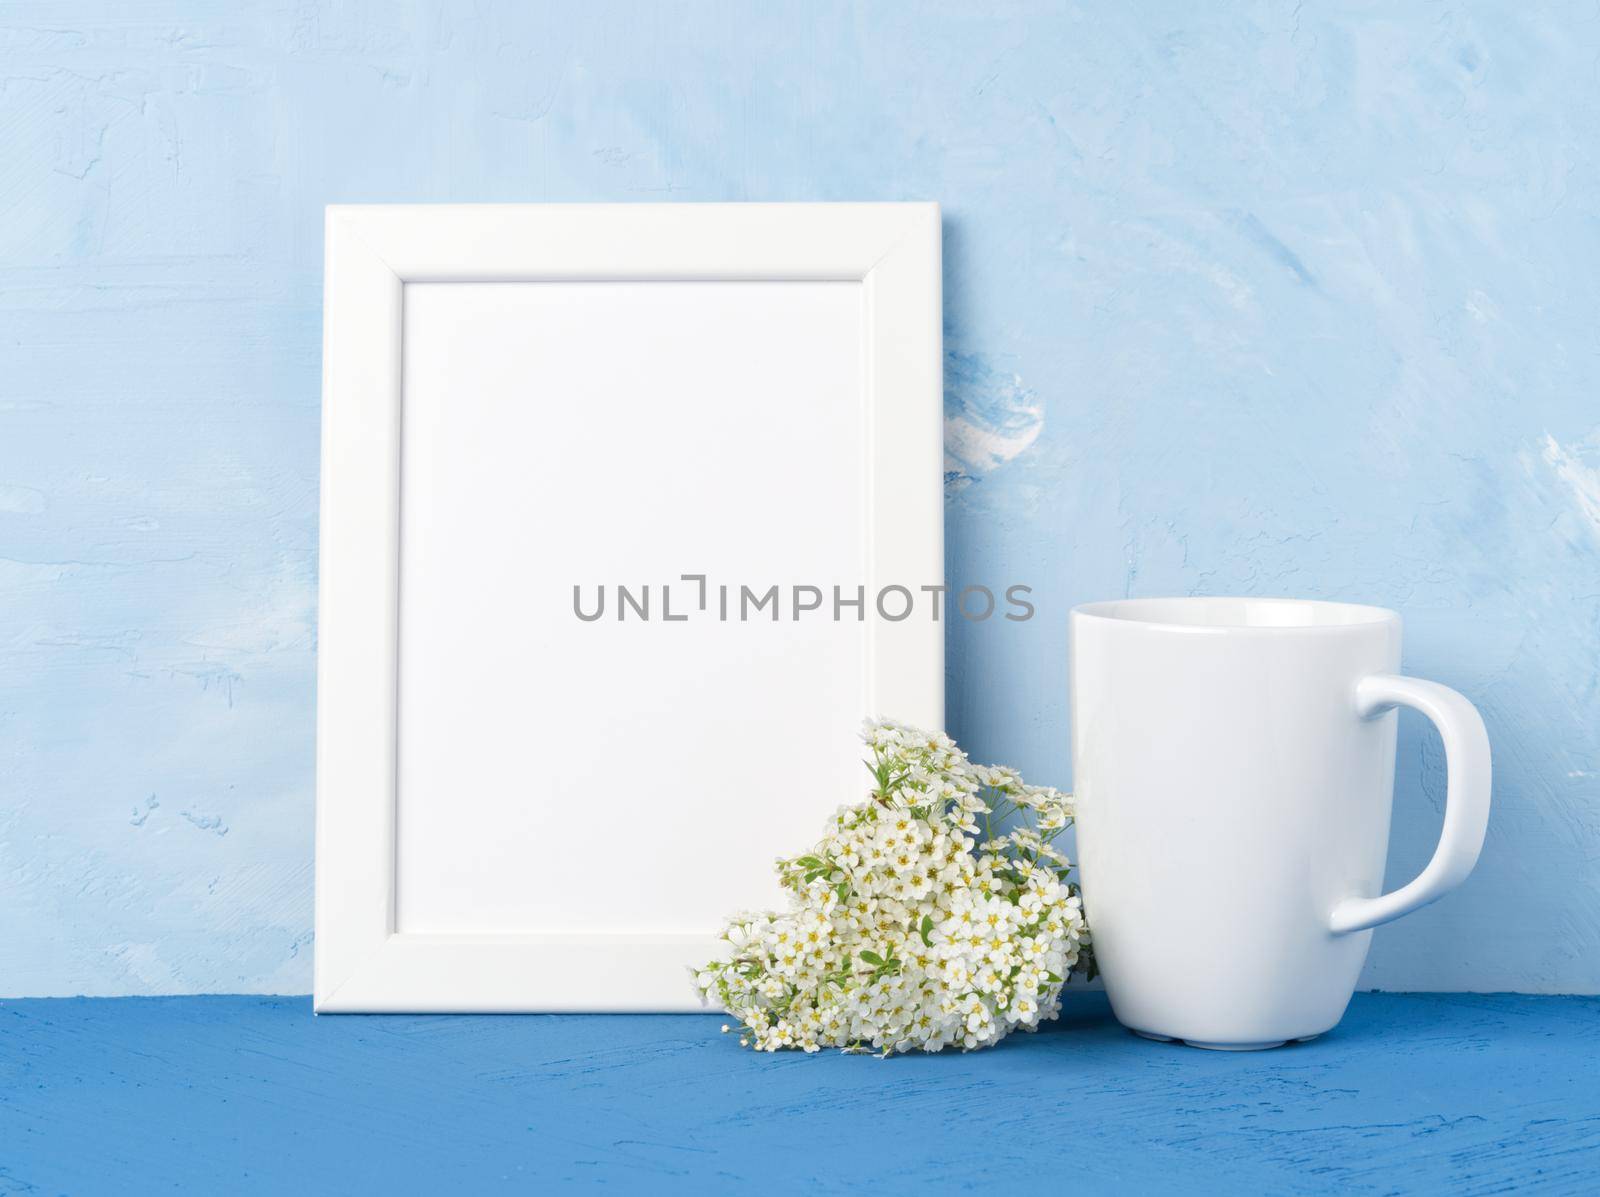 White mug with tea or coffee, frame, flower bouquet on the blue table opposite blue concrete wall. Mock up with empty space